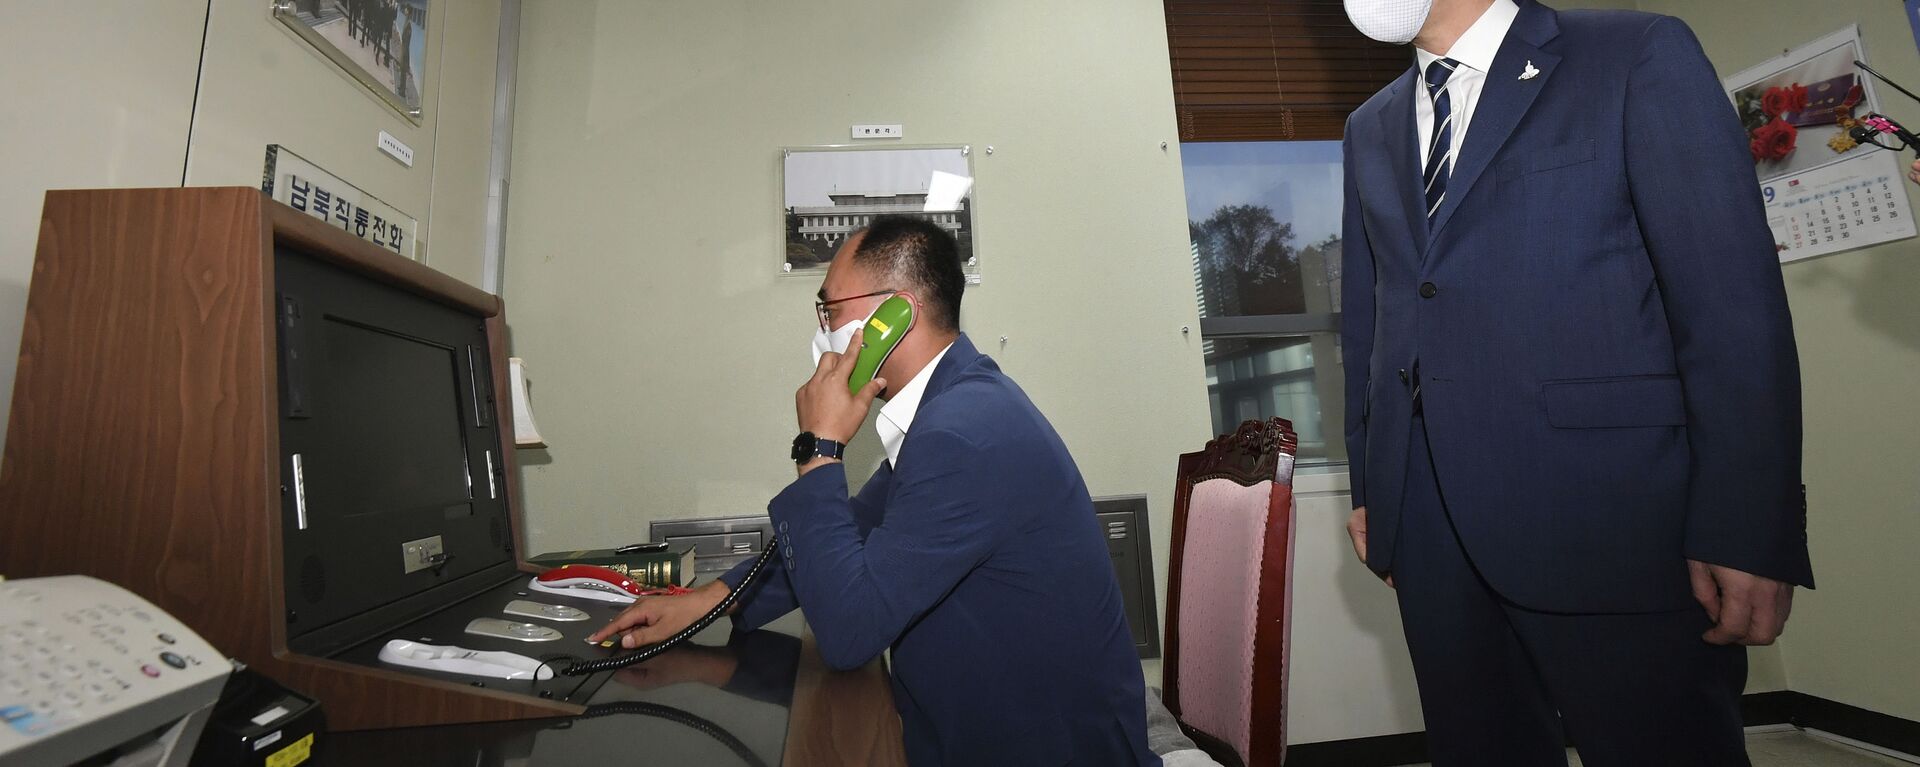 A South Korean government official makes a phone calls to North Korea via the dedicated communications hotline as South Korean Unification Minister Lee In-young, right, watches during a visit to Panmunjom in the Demilitarized Zone, South Korea, Wednesday, Sept. 16, 2020 - Sputnik International, 1920, 29.09.2021